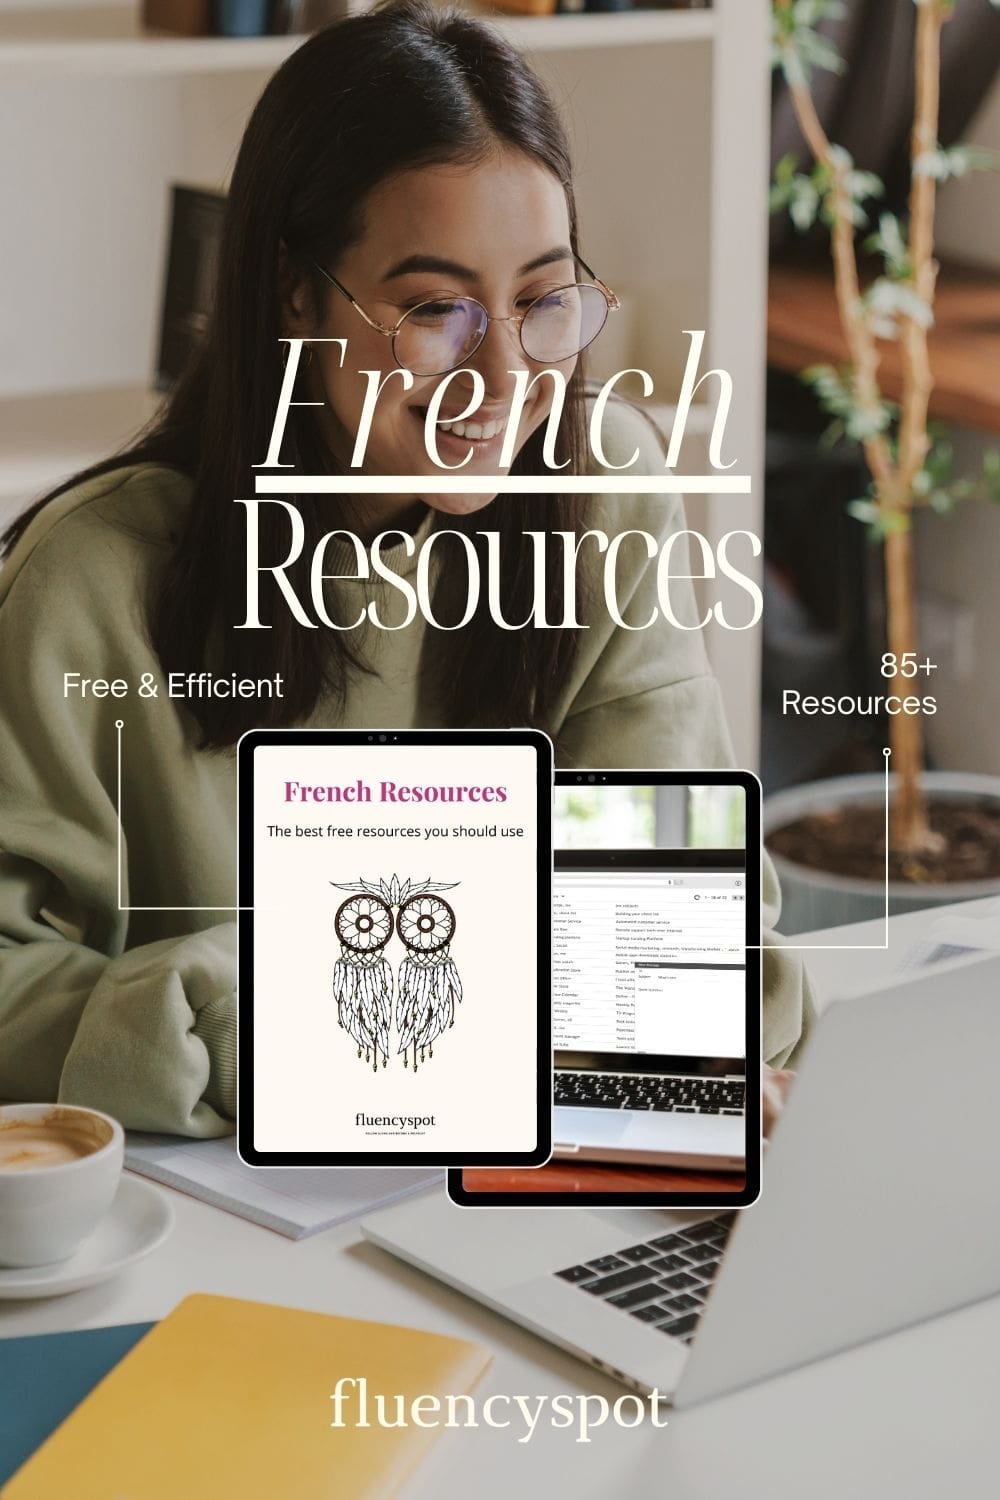 French Resources